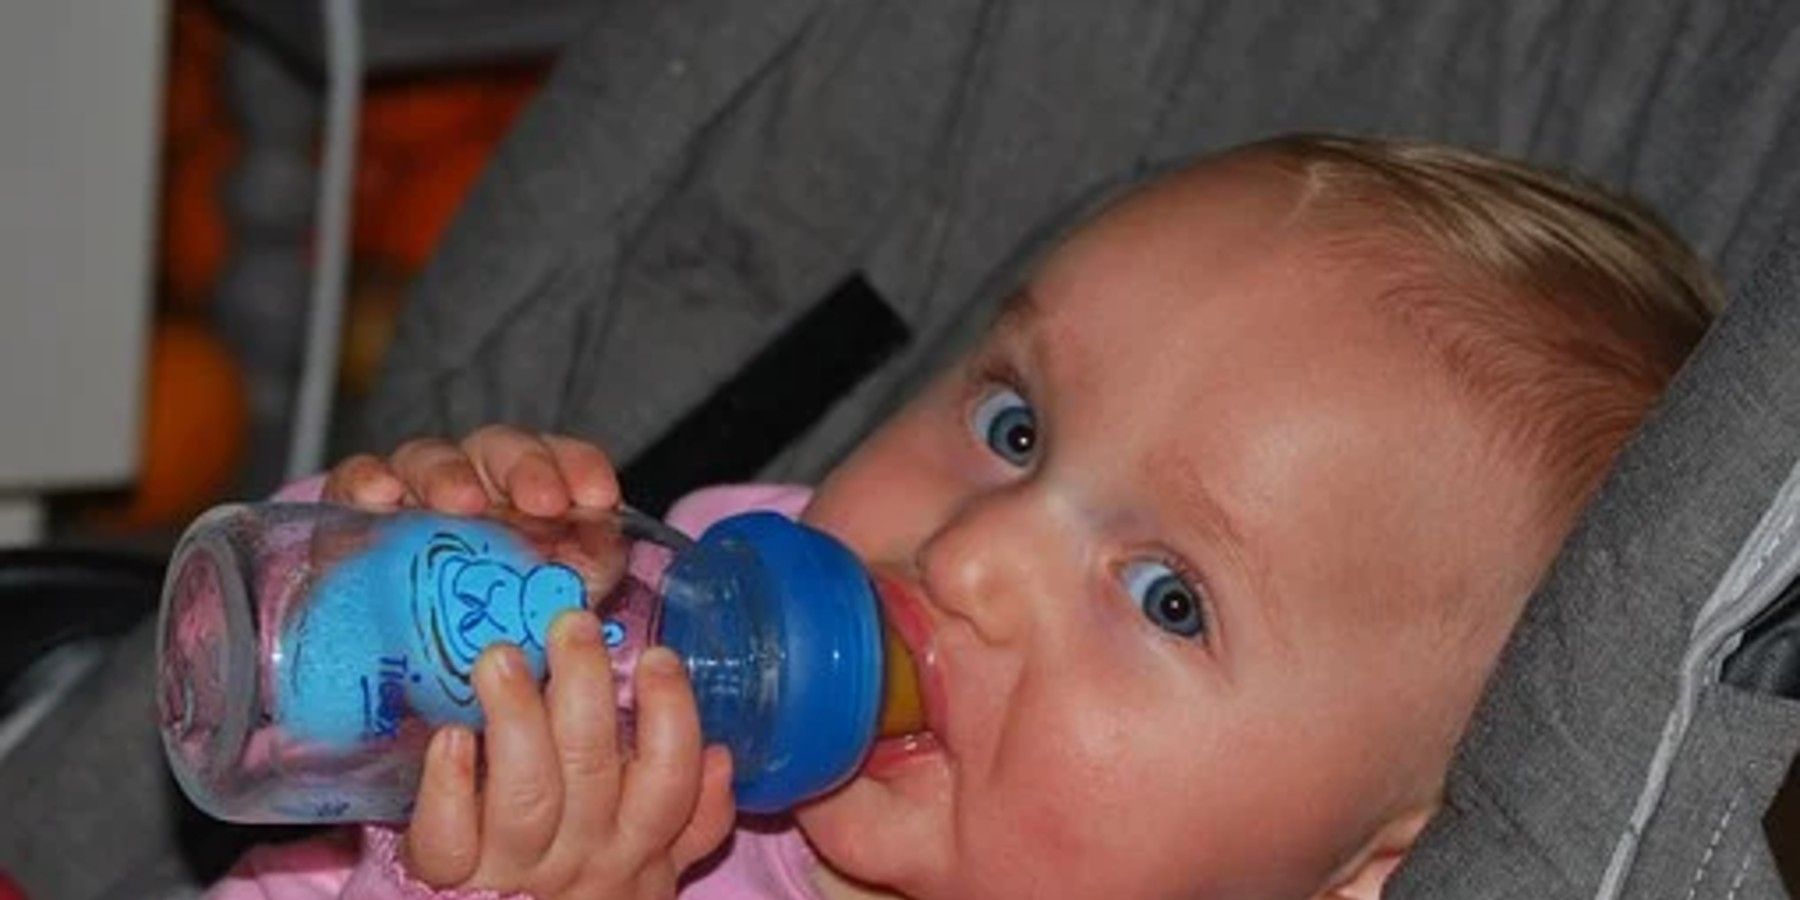 Baby drinking from bottle, and they are not the world's longest breastfed baby.